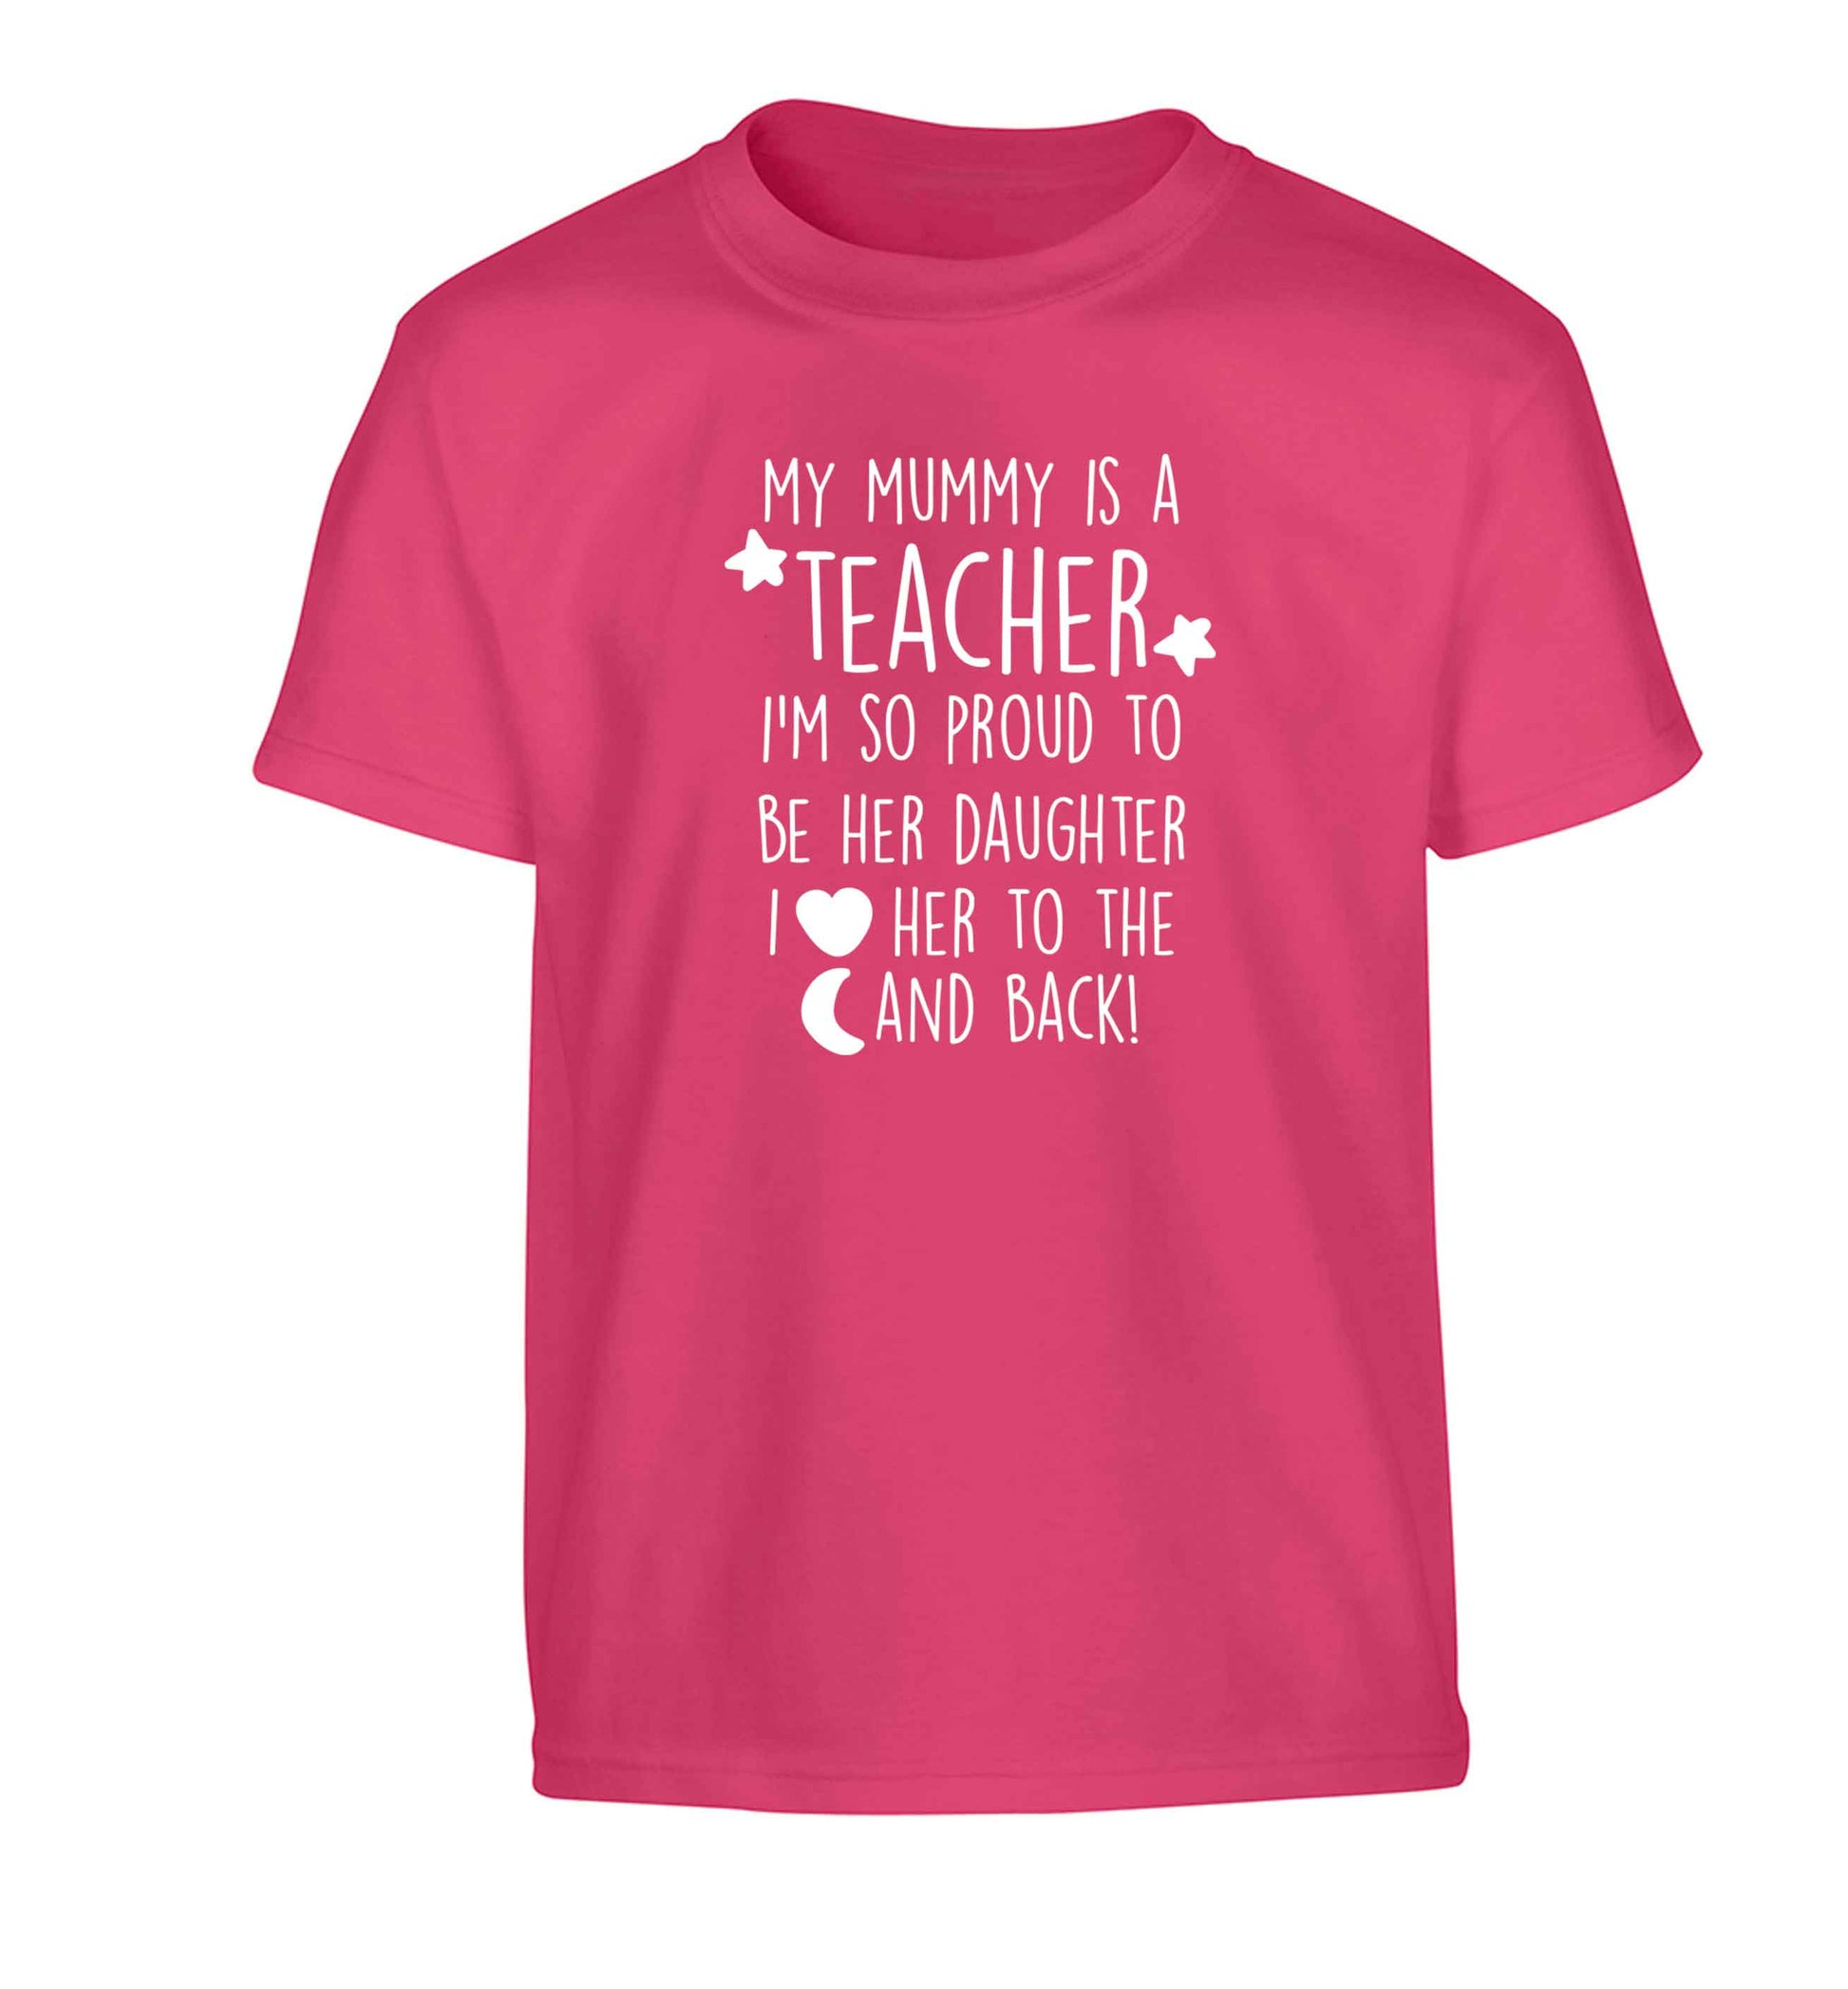 My mummy is a teacher I'm so proud to be her daughter I love her to the moon and back Children's pink Tshirt 12-13 Years